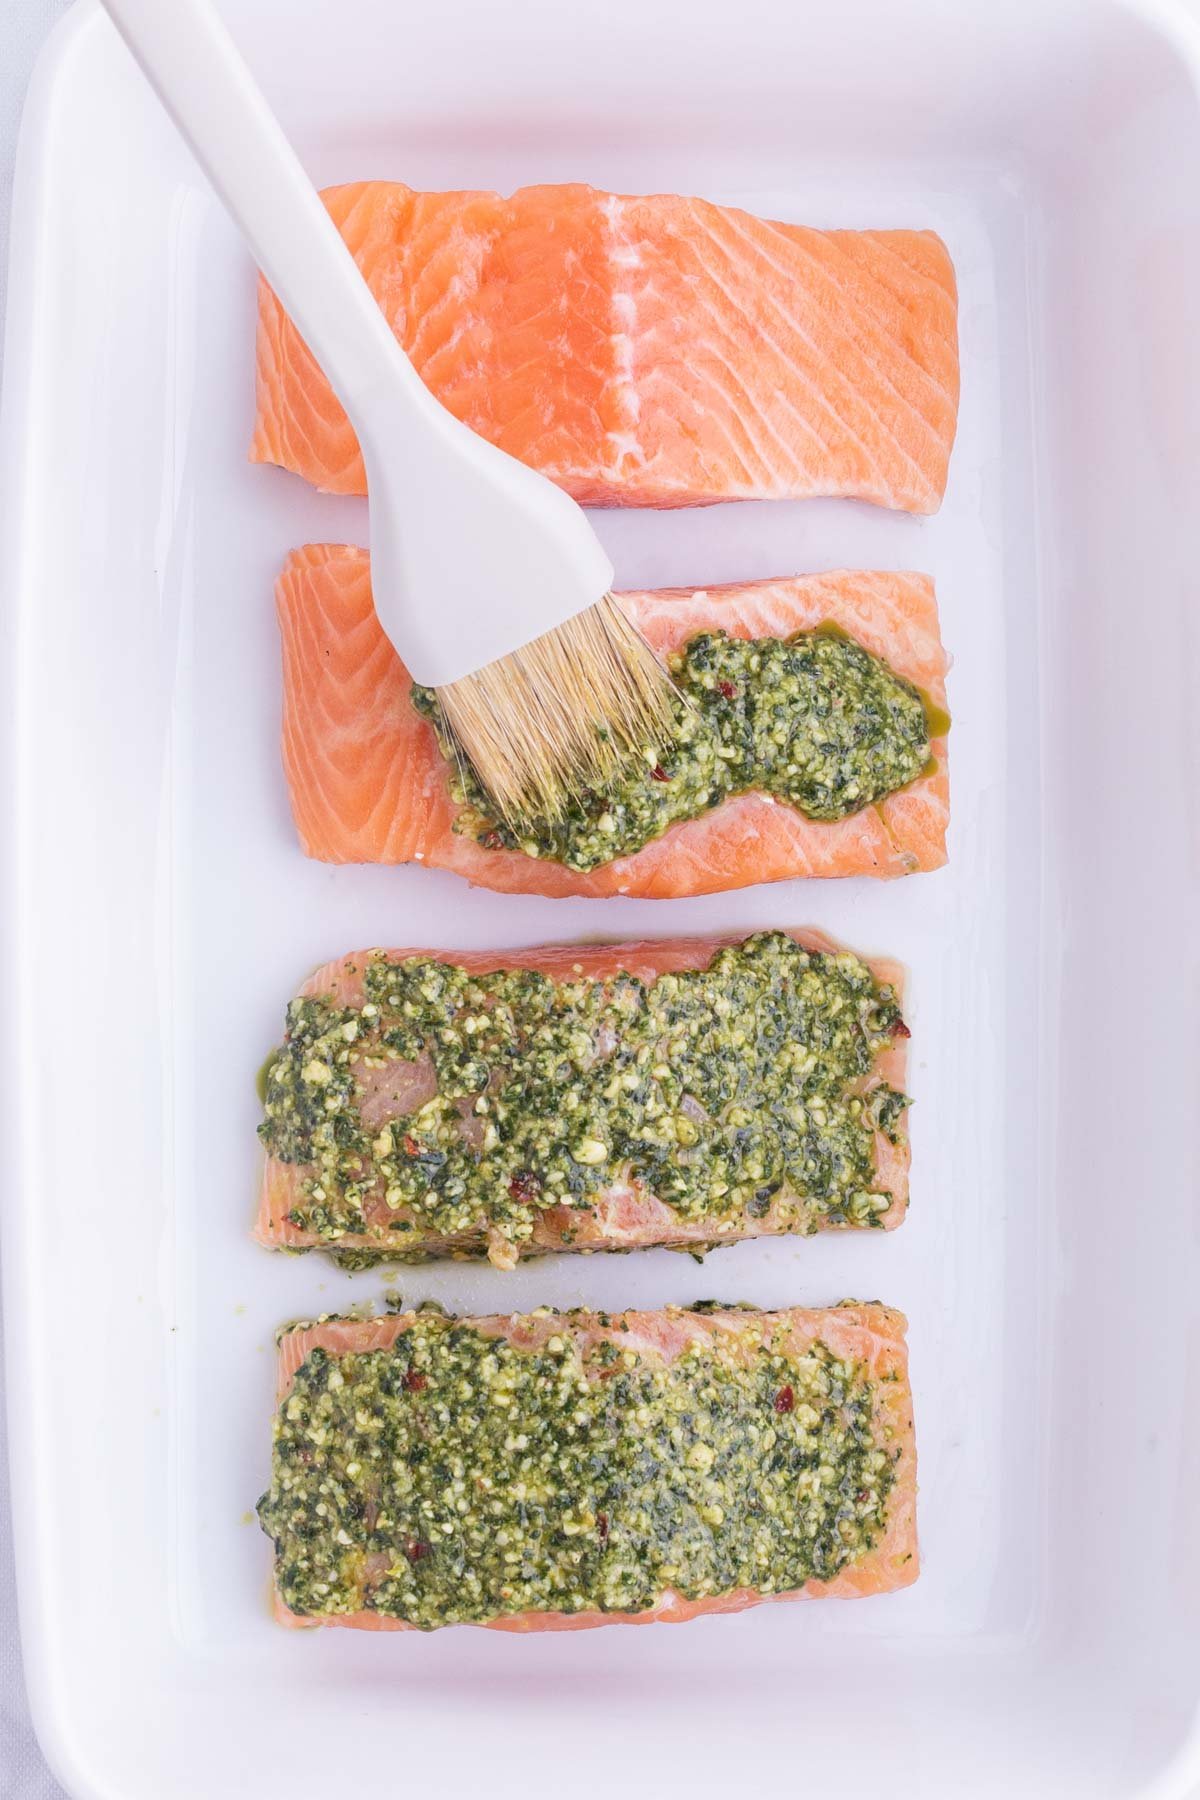 Pesto sauce is brushed over salmon filets.